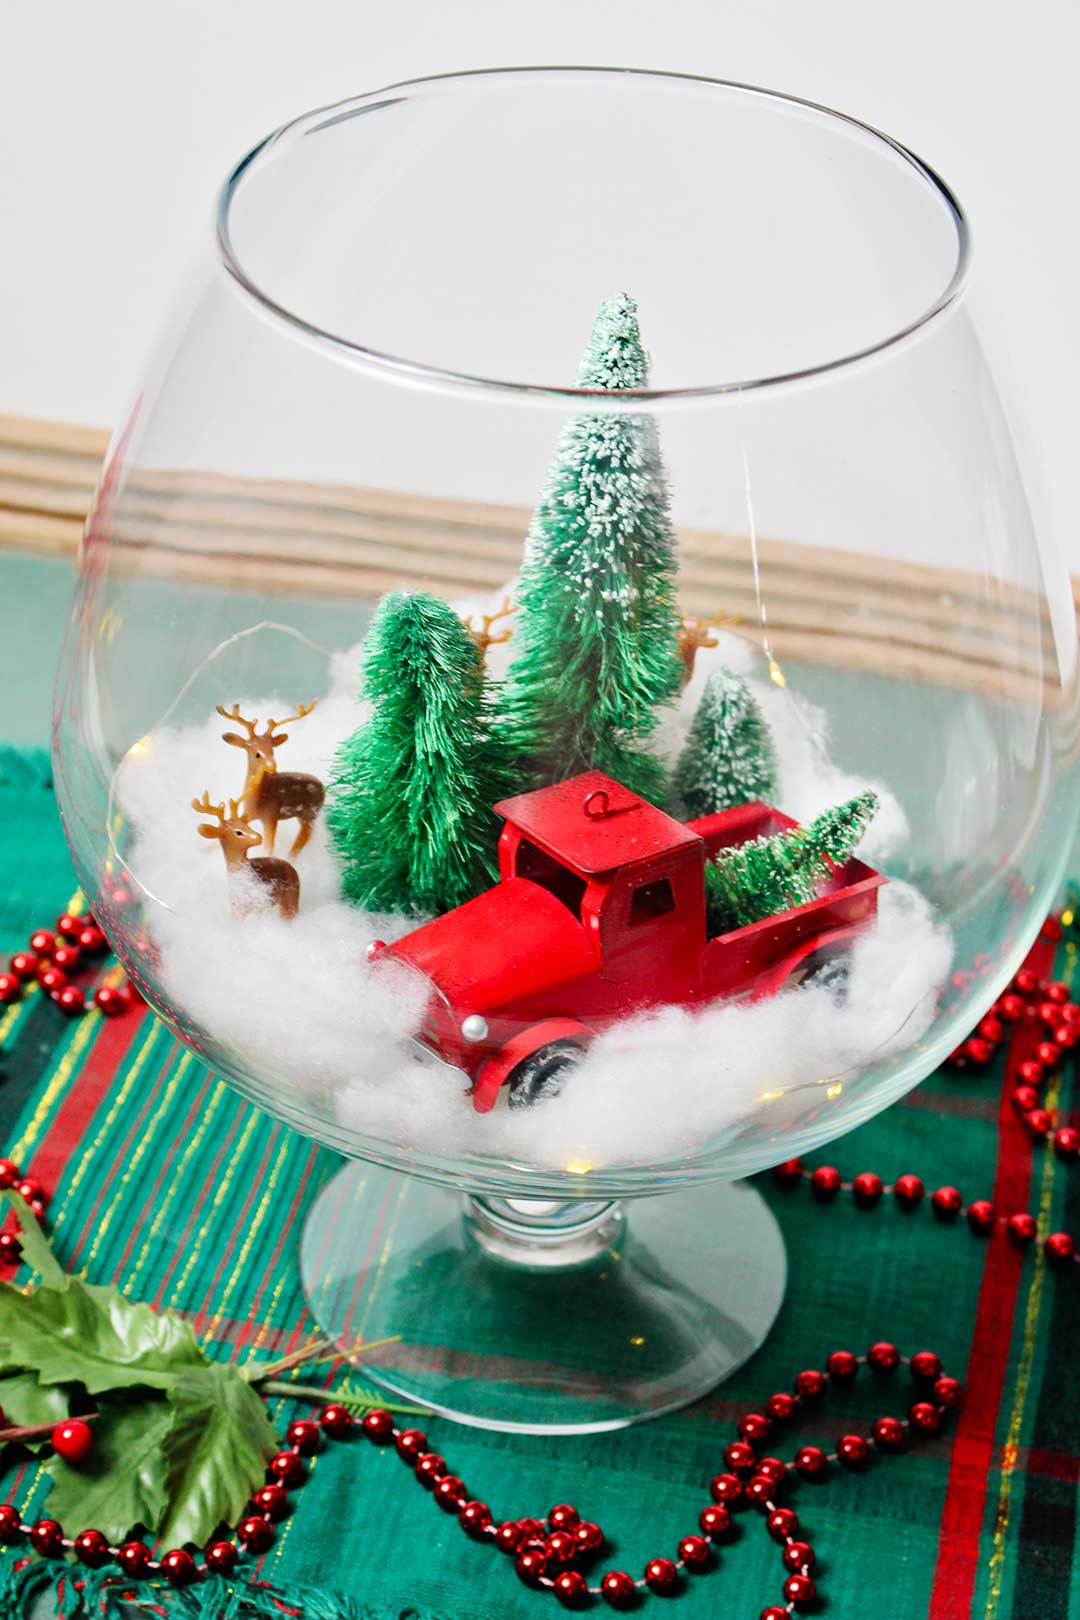 Finished image of glass bowl Christmas centerpiece resting on table with green plaid runner and red beaded garland.